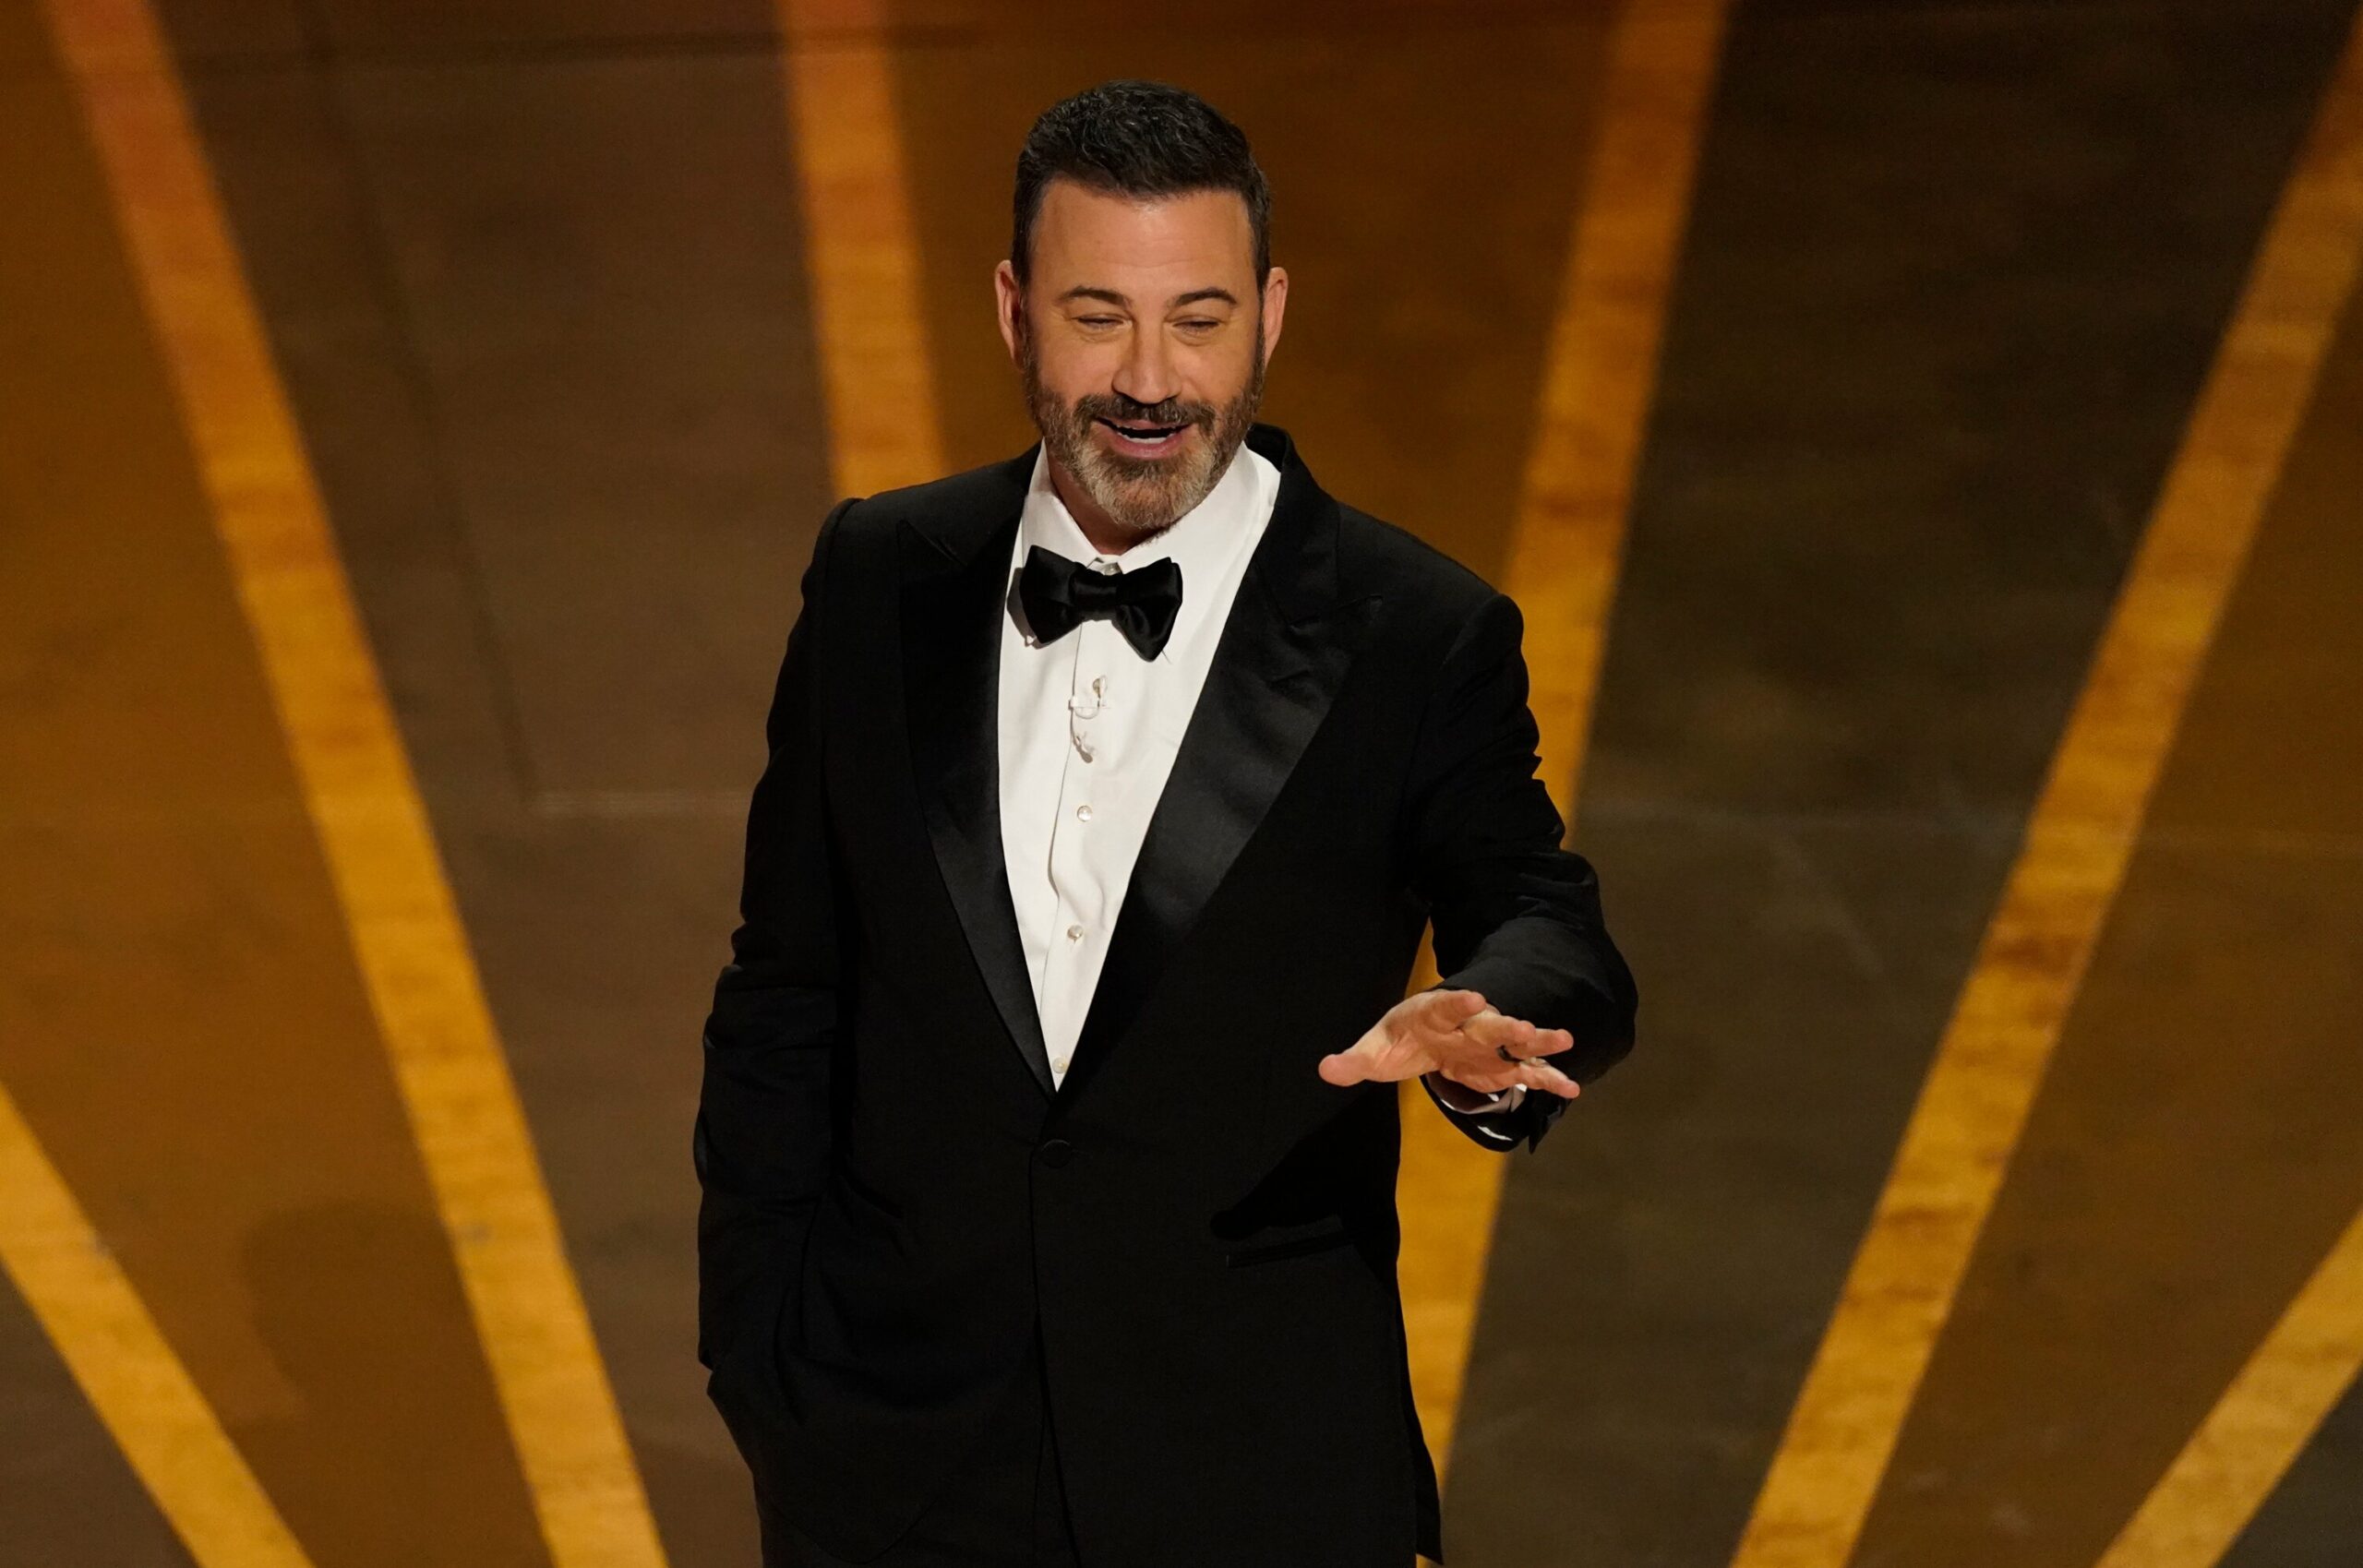 Former Rep. George Santos filed a lawsuit against late-night host Jimmy Kimmel for tricking him into making videos used to mock him in a recurring TV segment. (AP Photo/Chris Pizzello)